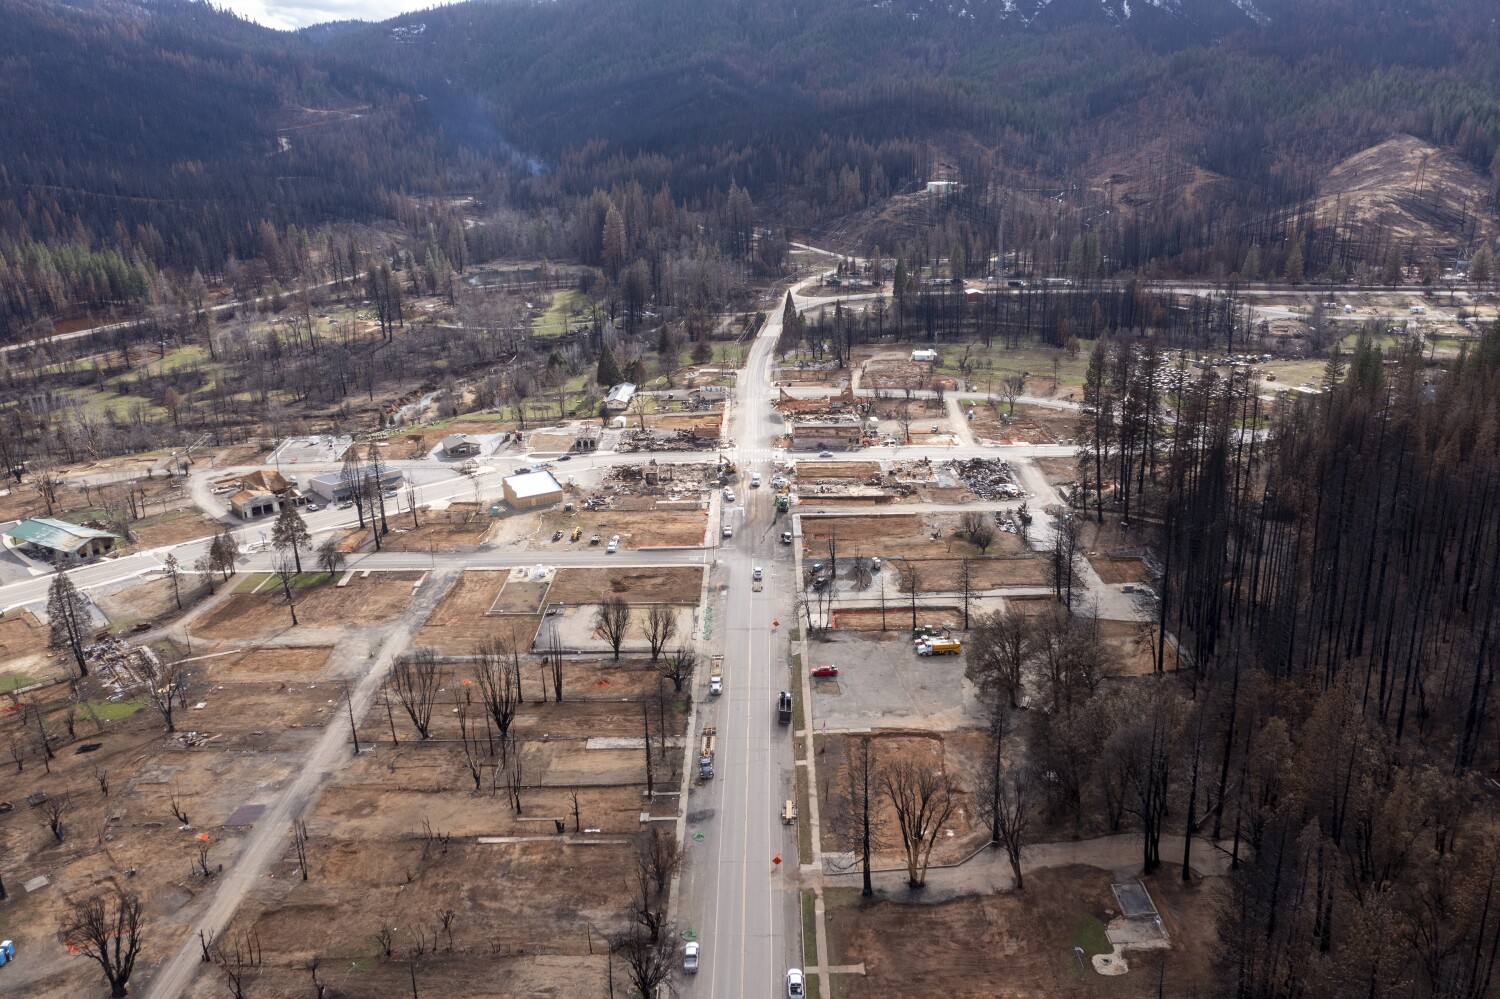 Greenville was destroyed by wildfire. Can it be rebuilt to survive the next one?